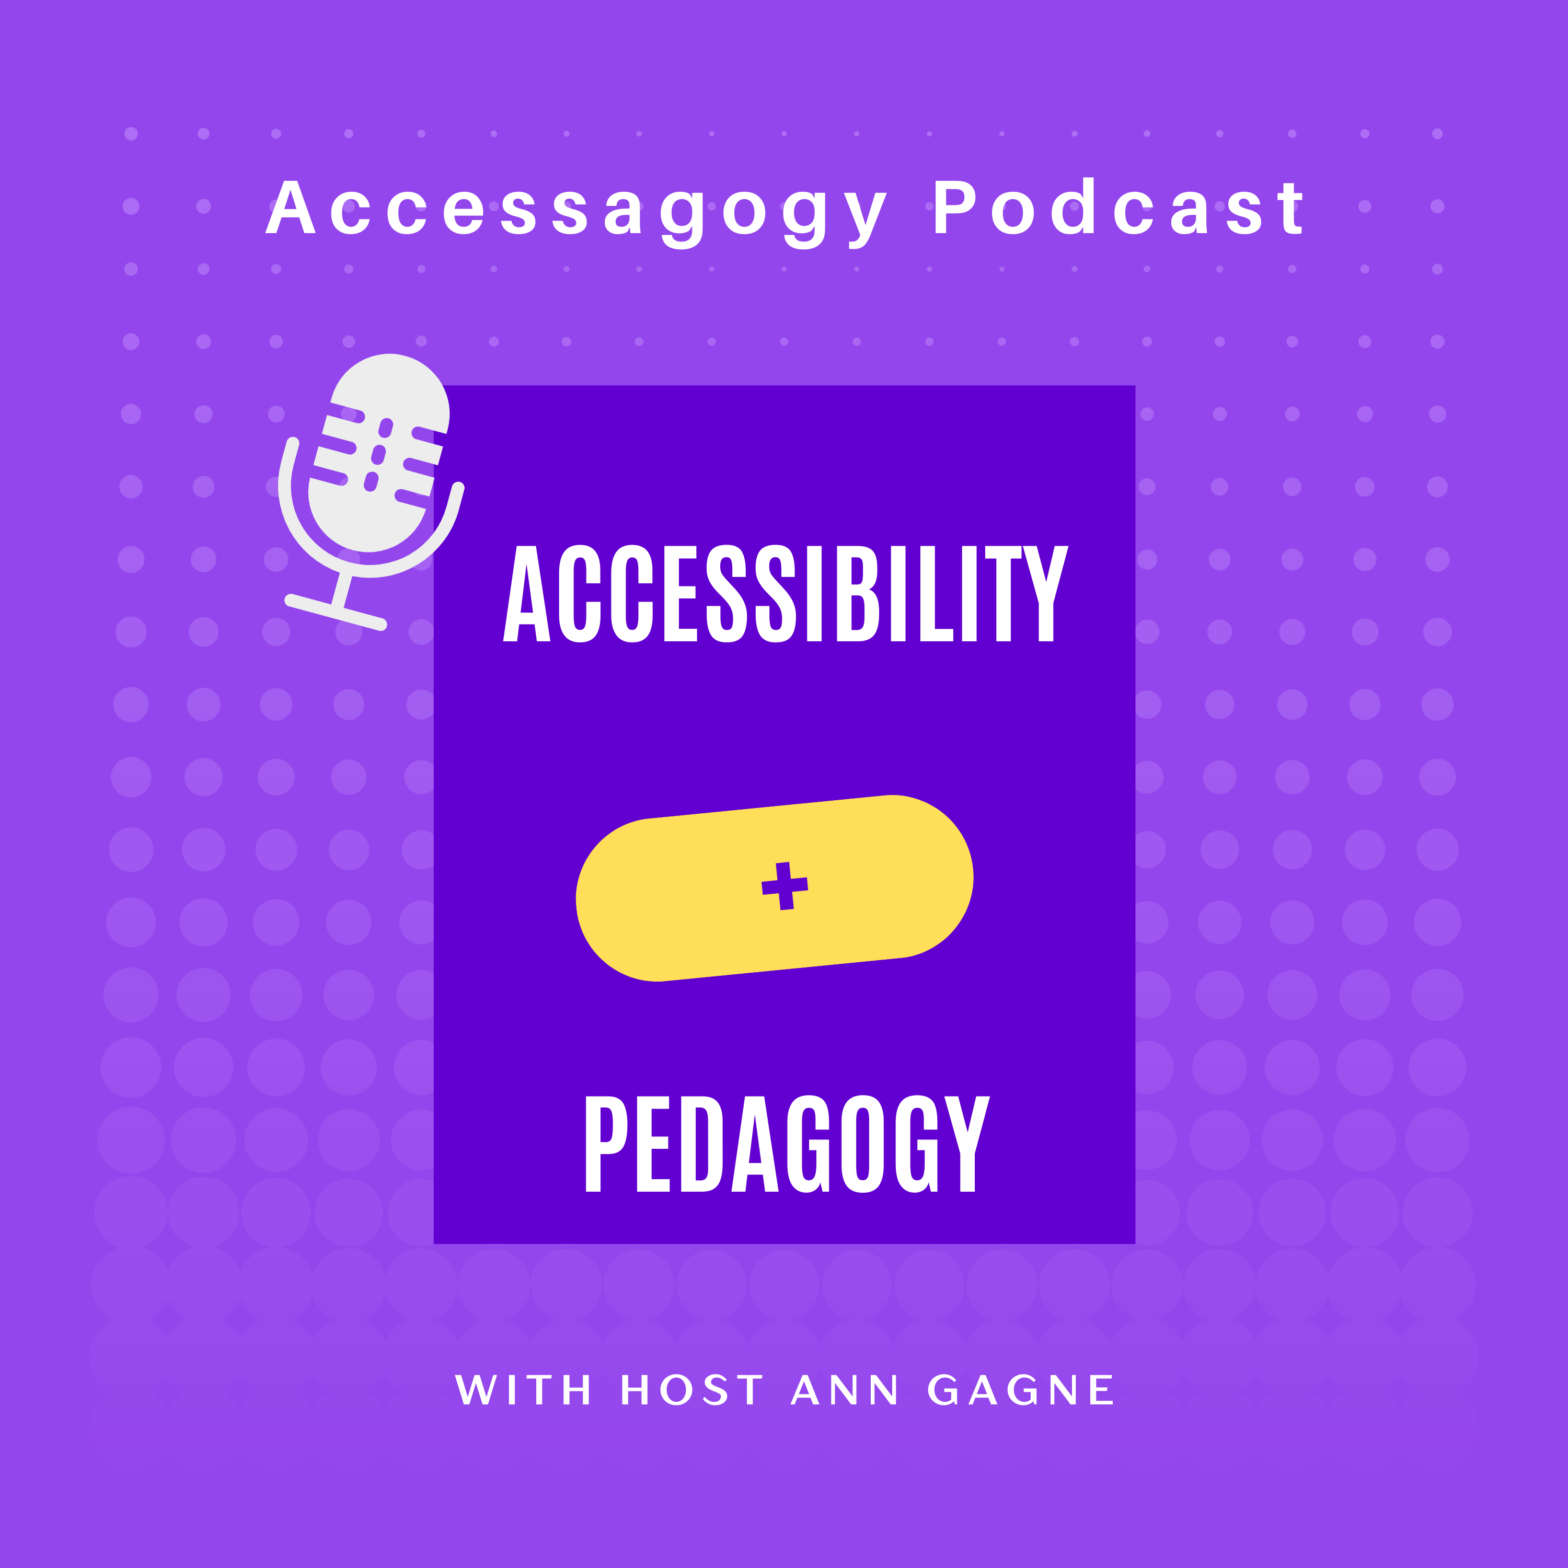 Podcast cover for Accessagogy podcast. On a purple background it has the words accessibility + pedagogy in the centre and with host Ann Gagne at the bottom